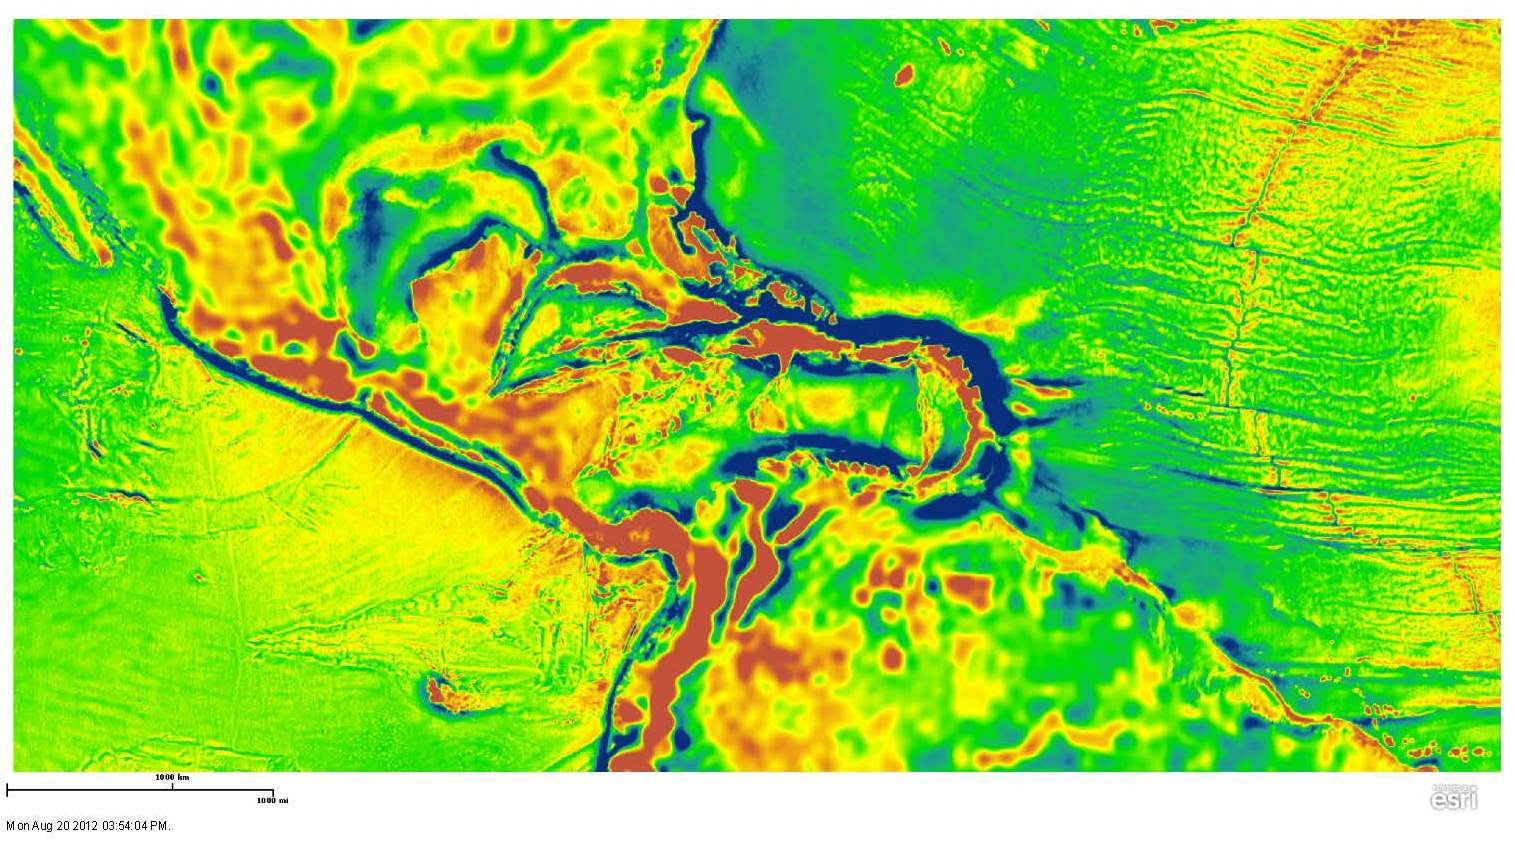 Topography and Bathymetry of the Caribbean and Northern South American Region (Caribbean Basins, Tectonics,
and Hydrocarbons Project, 2011